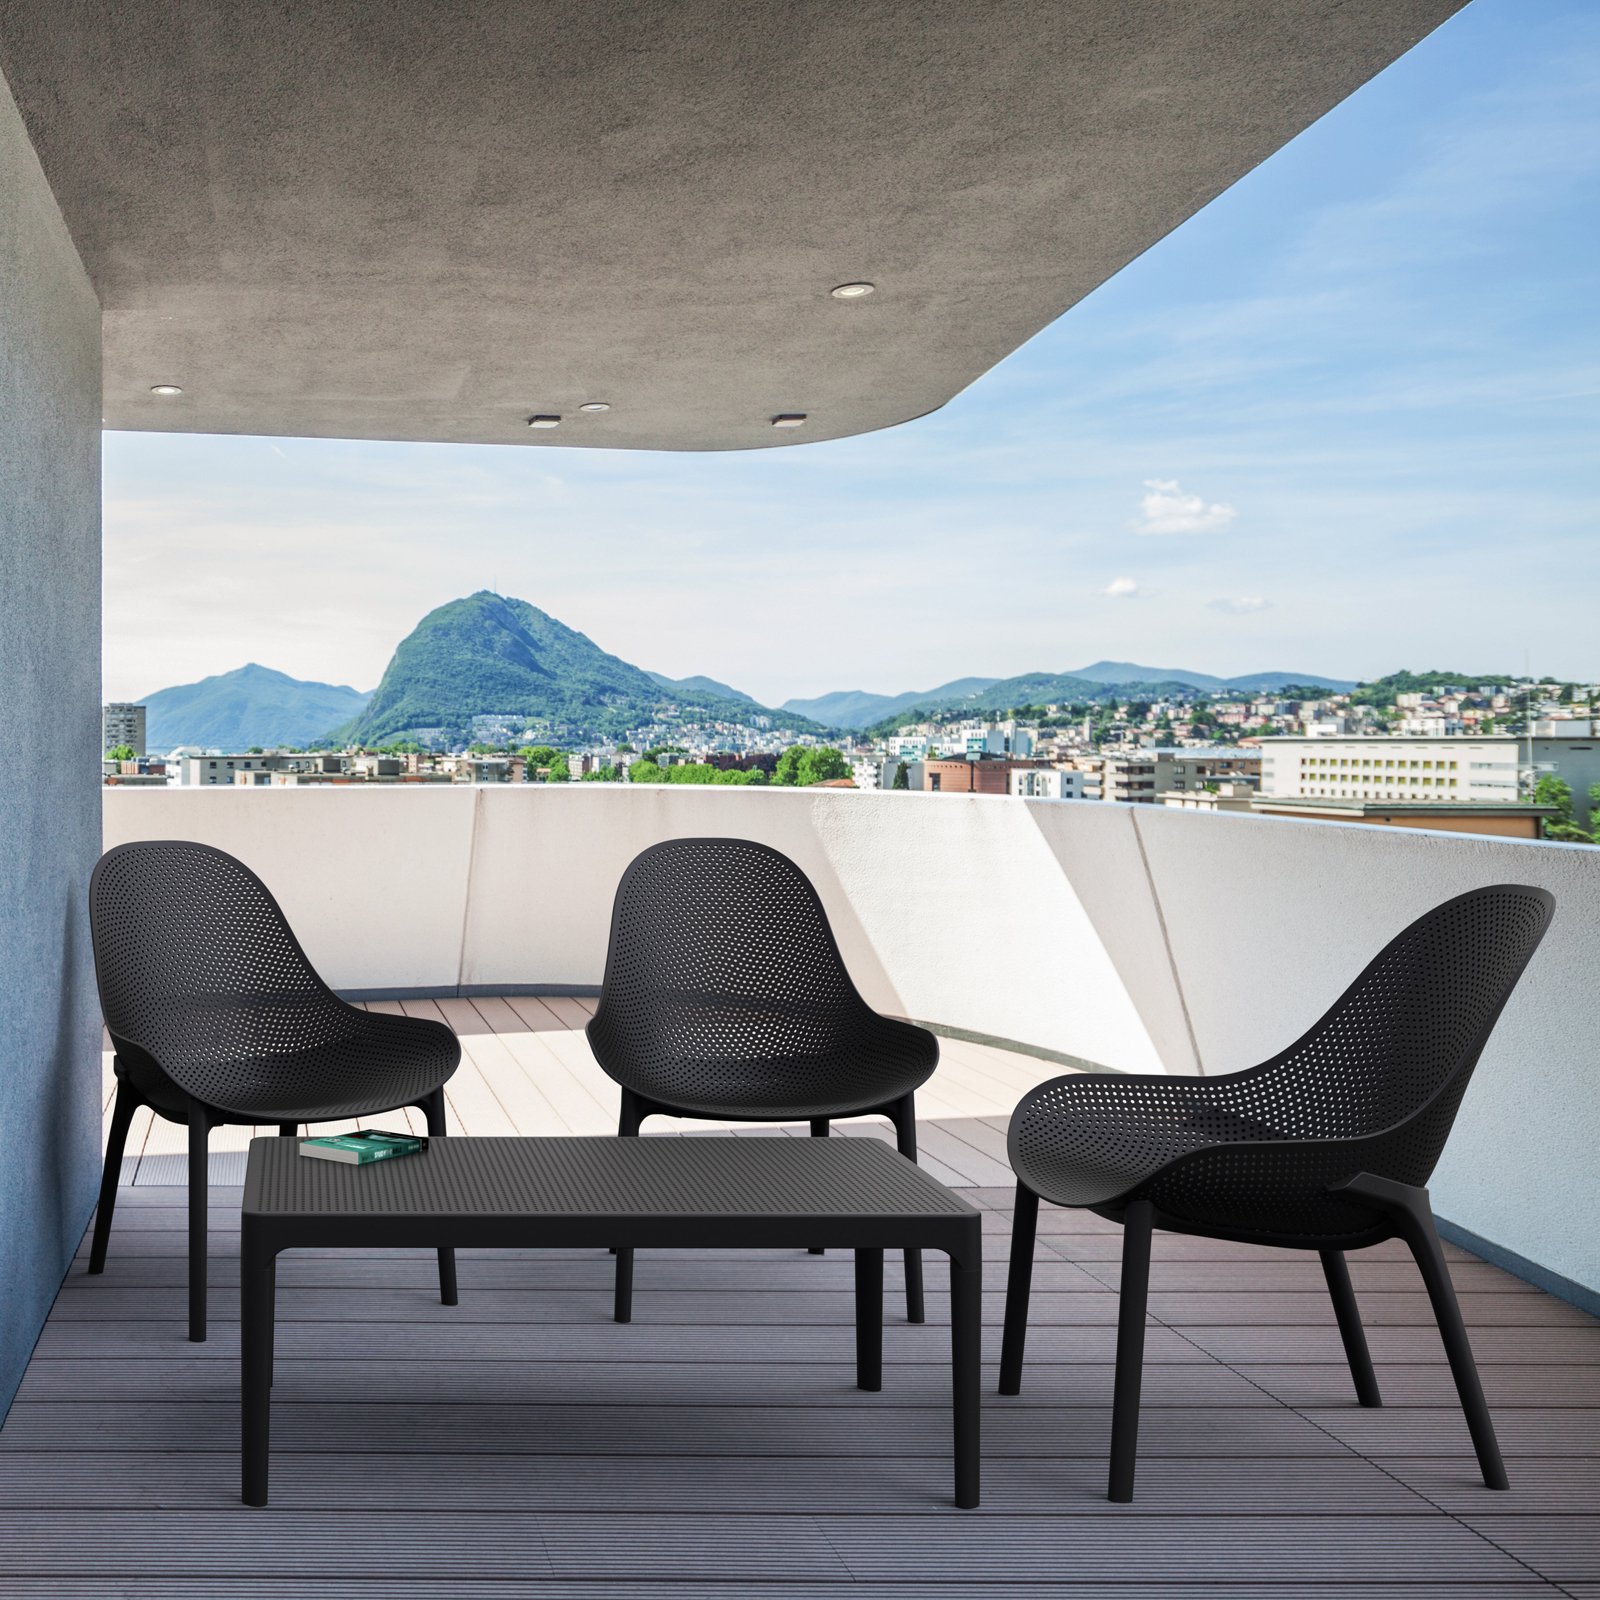 Compamia Sky Patio Chair in Dark Gray - image 4 of 11